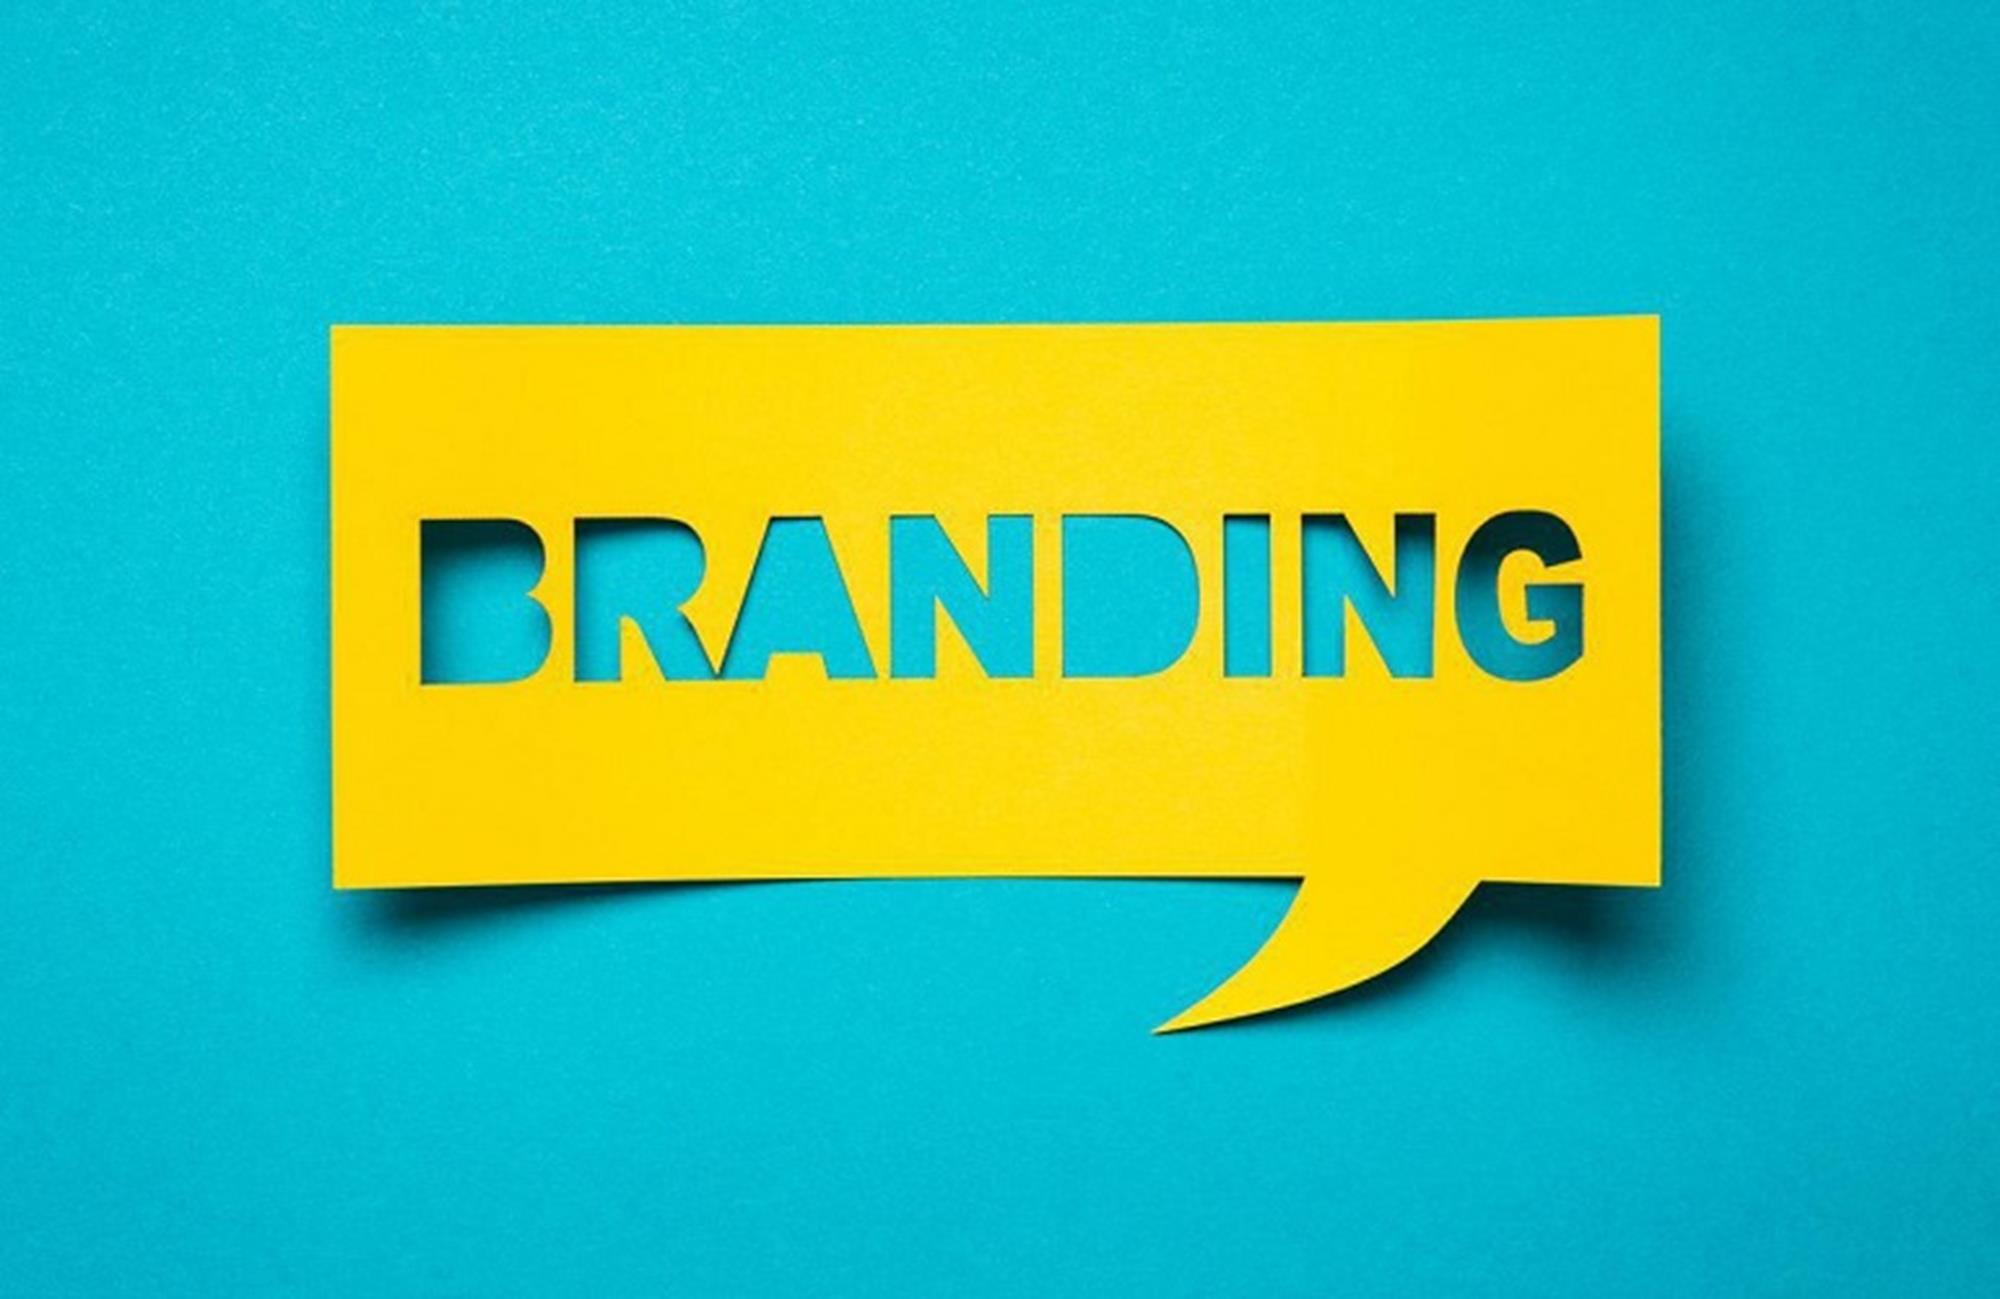 Tips and Tricks for Branding: It’s not as hard as it looks